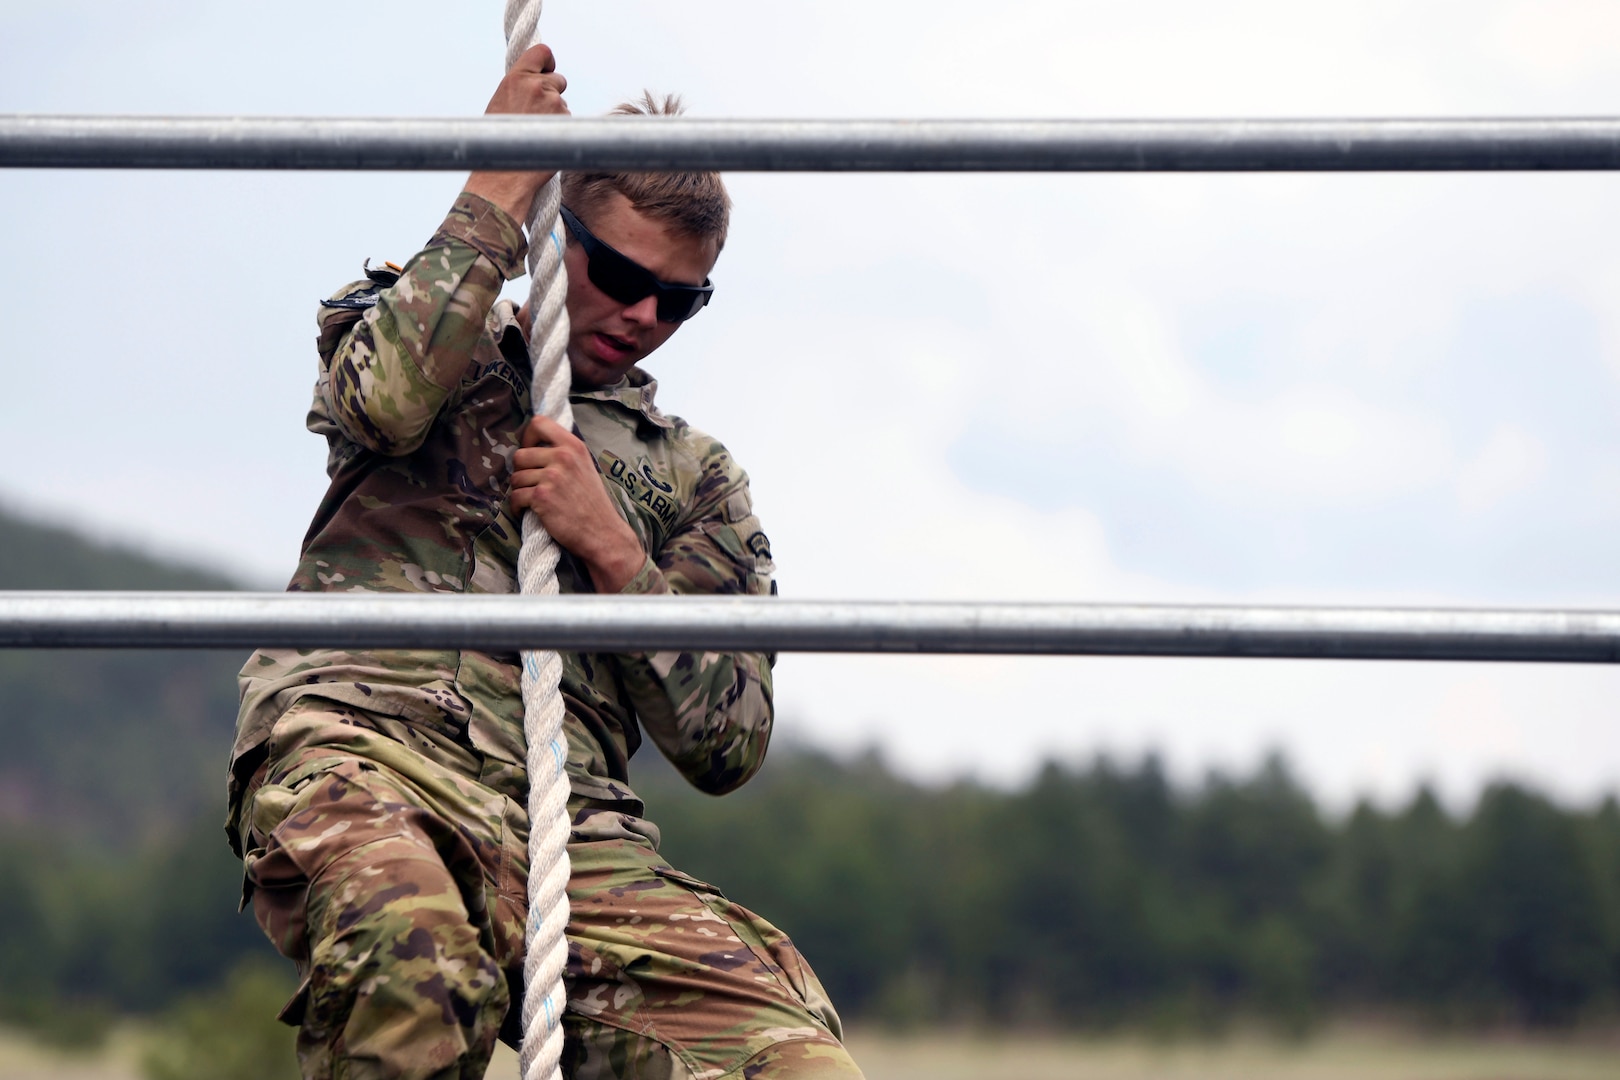 Army Sgt. William Lukens, a tactical power generator mechanic with the Tennessee Army National Guard’s 208th Area Support Medical Company, 301st Troop Command Battalion, 30th Troop Command Brigade, lifts his weight up a rope as part of an obstacle course during the 2021 Army National Guard Best Warrior Competition at Camp Navajo, Arizona, July 22, 2021. The competition spans three physically and mentally demanding days where competitors are tested on a variety of tactical and technical skills as they vie to be named the Army Guard’s Soldier and Noncommissioned Officer of the Year. The winners then represent the Army Guard in the Department of the Army Best Warrior Competition later this year.